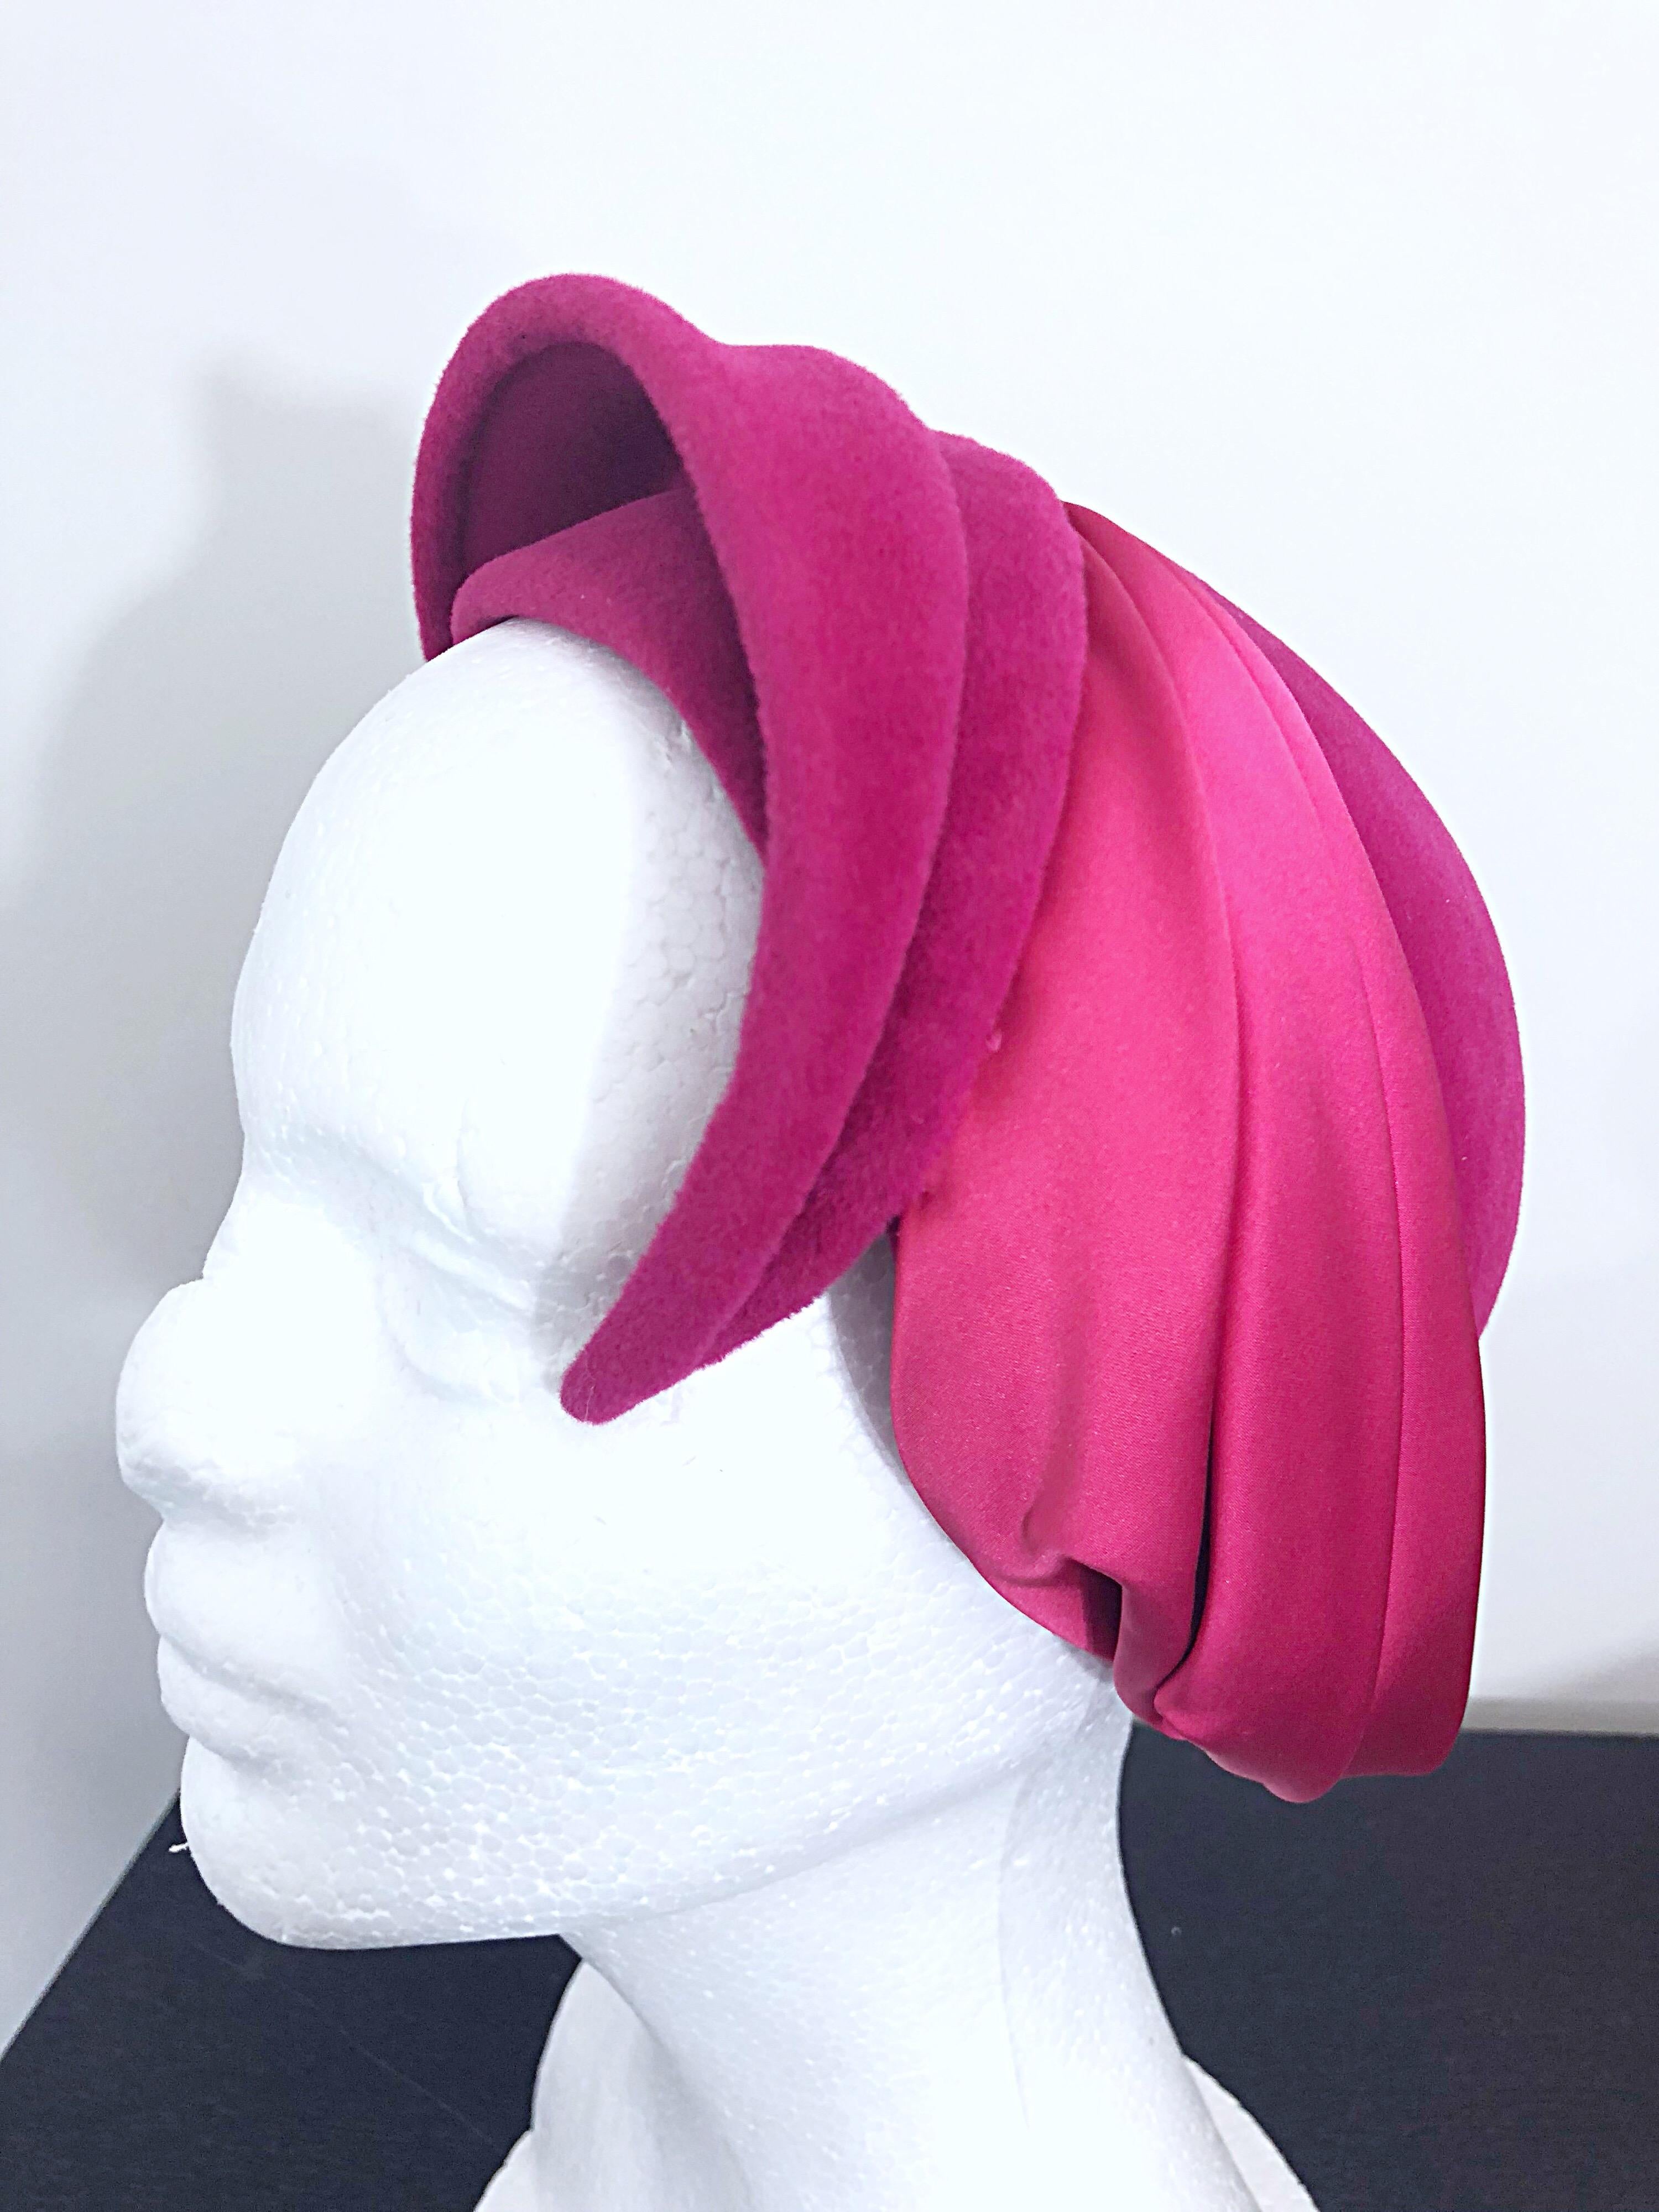 Rare vintage 50s ELSA SCHIAPARELLI schocking hot pink Avanat Garde velvet hat! Sits high on the hairline with amazing architecture. Silk satin details. A classic musuem worthy piece that is perfect for any collector or fashionista. In great